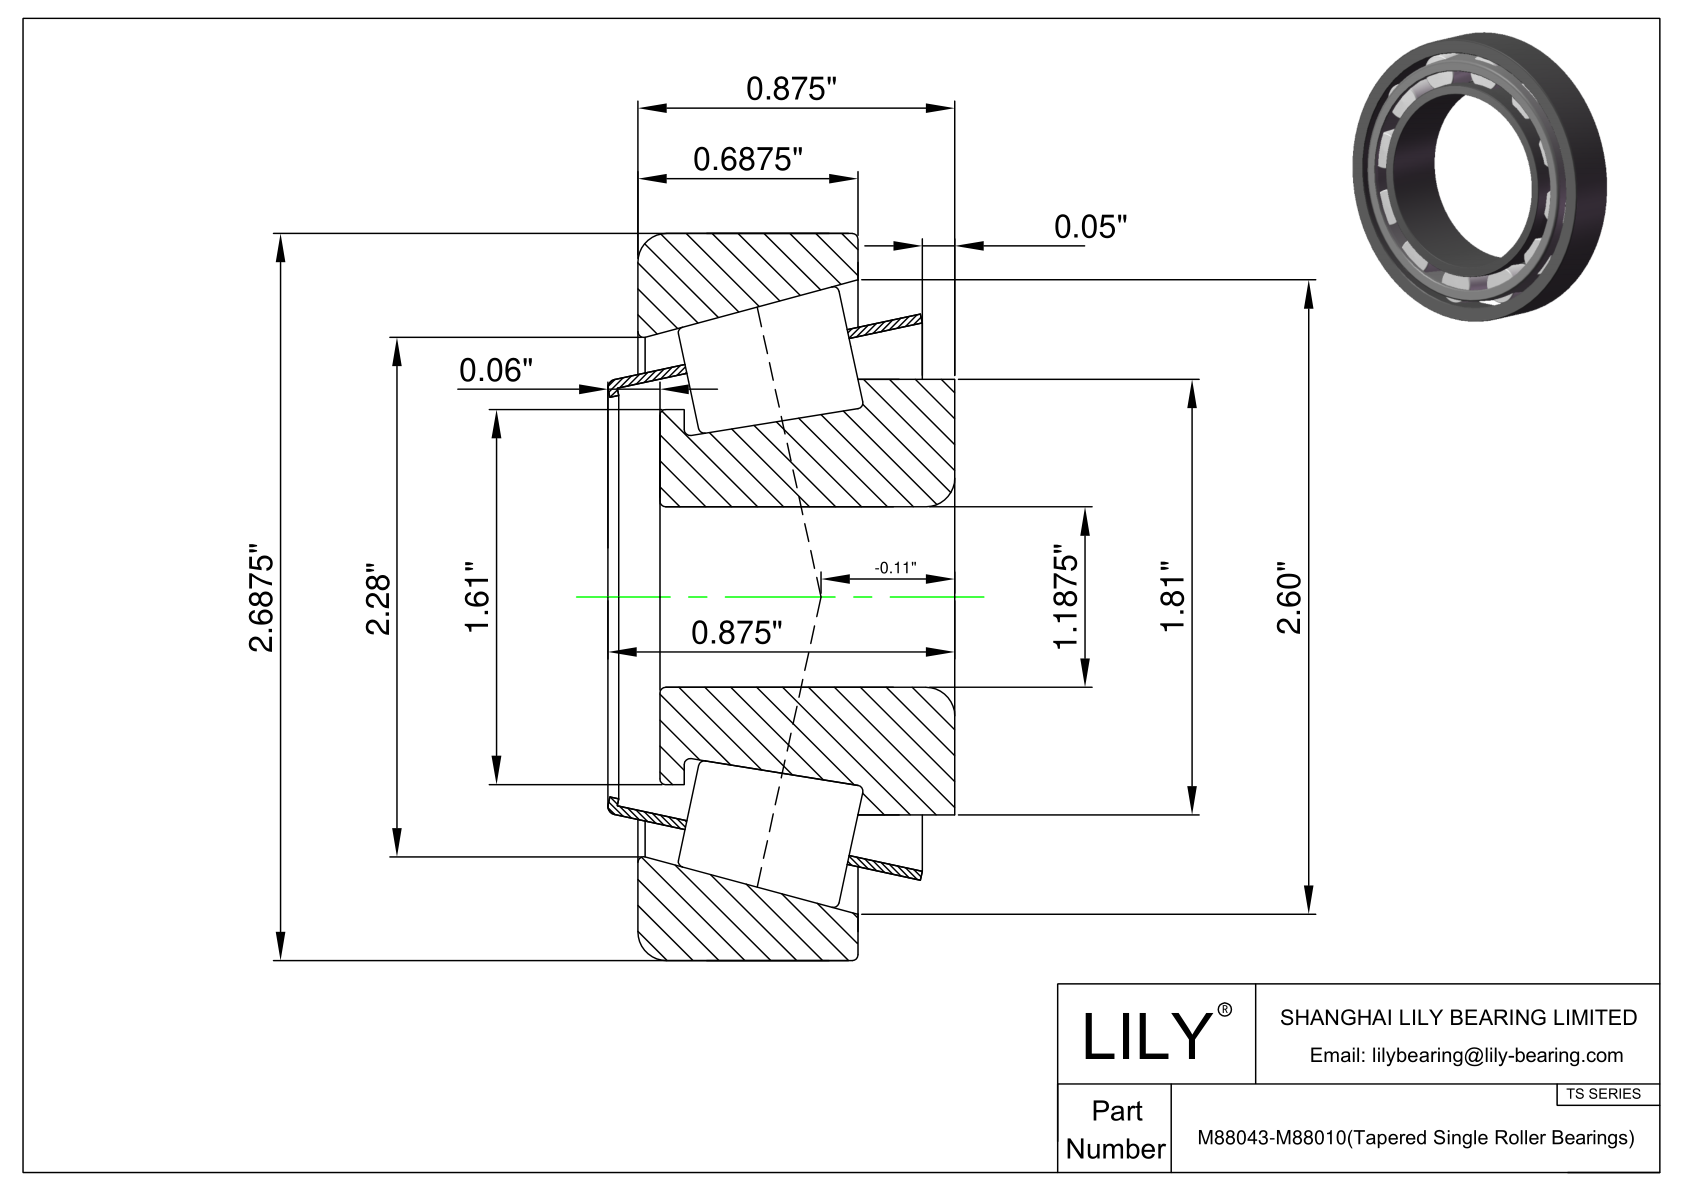 M88043-M88010 TS (Tapered Single Roller Bearings) (Imperial) cad drawing